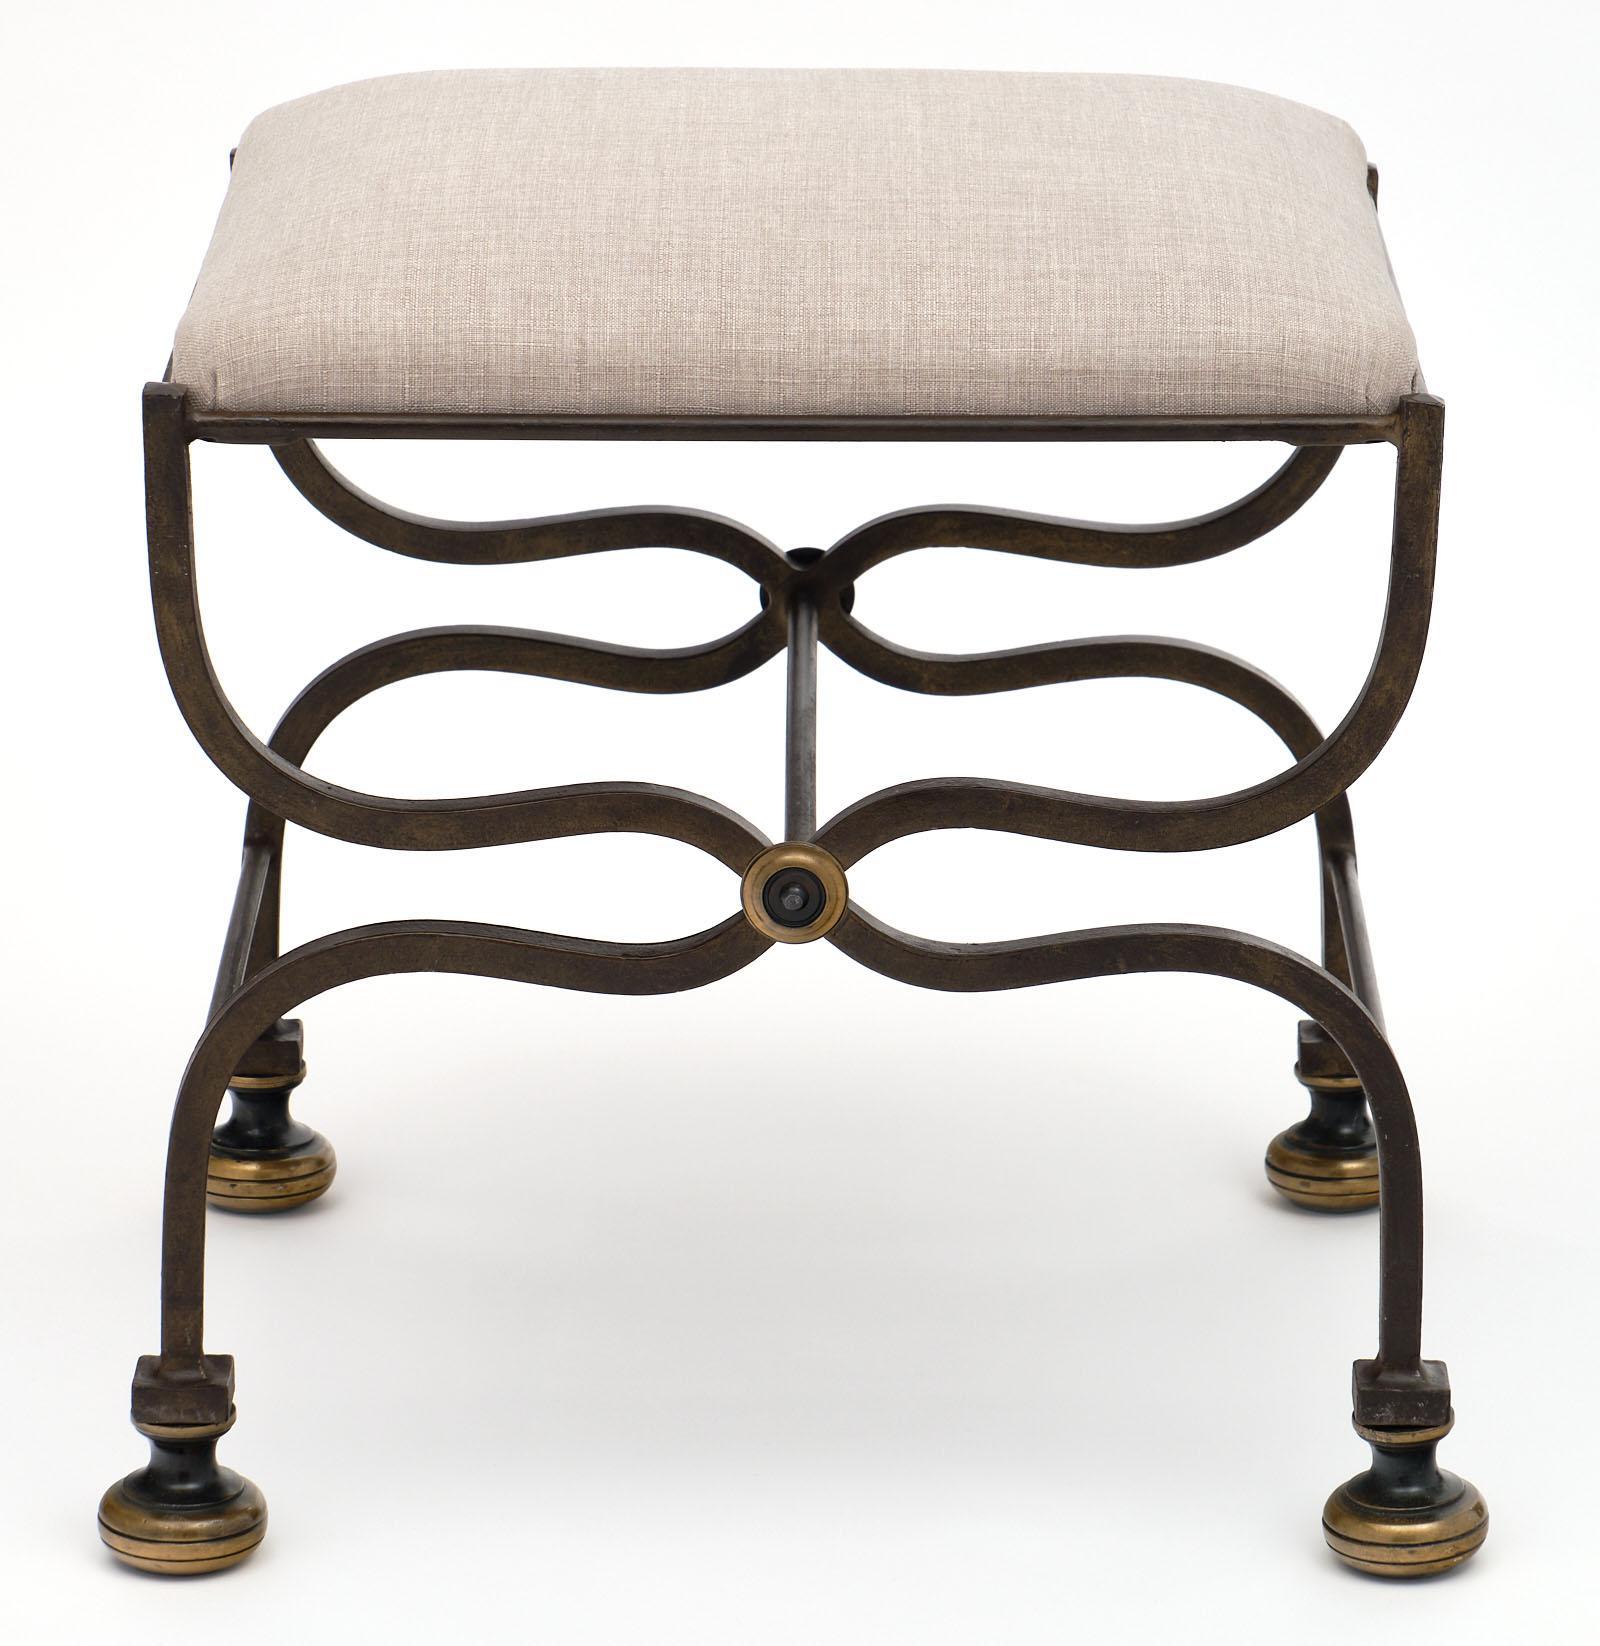 Bronze Antique French Forged Iron Bench